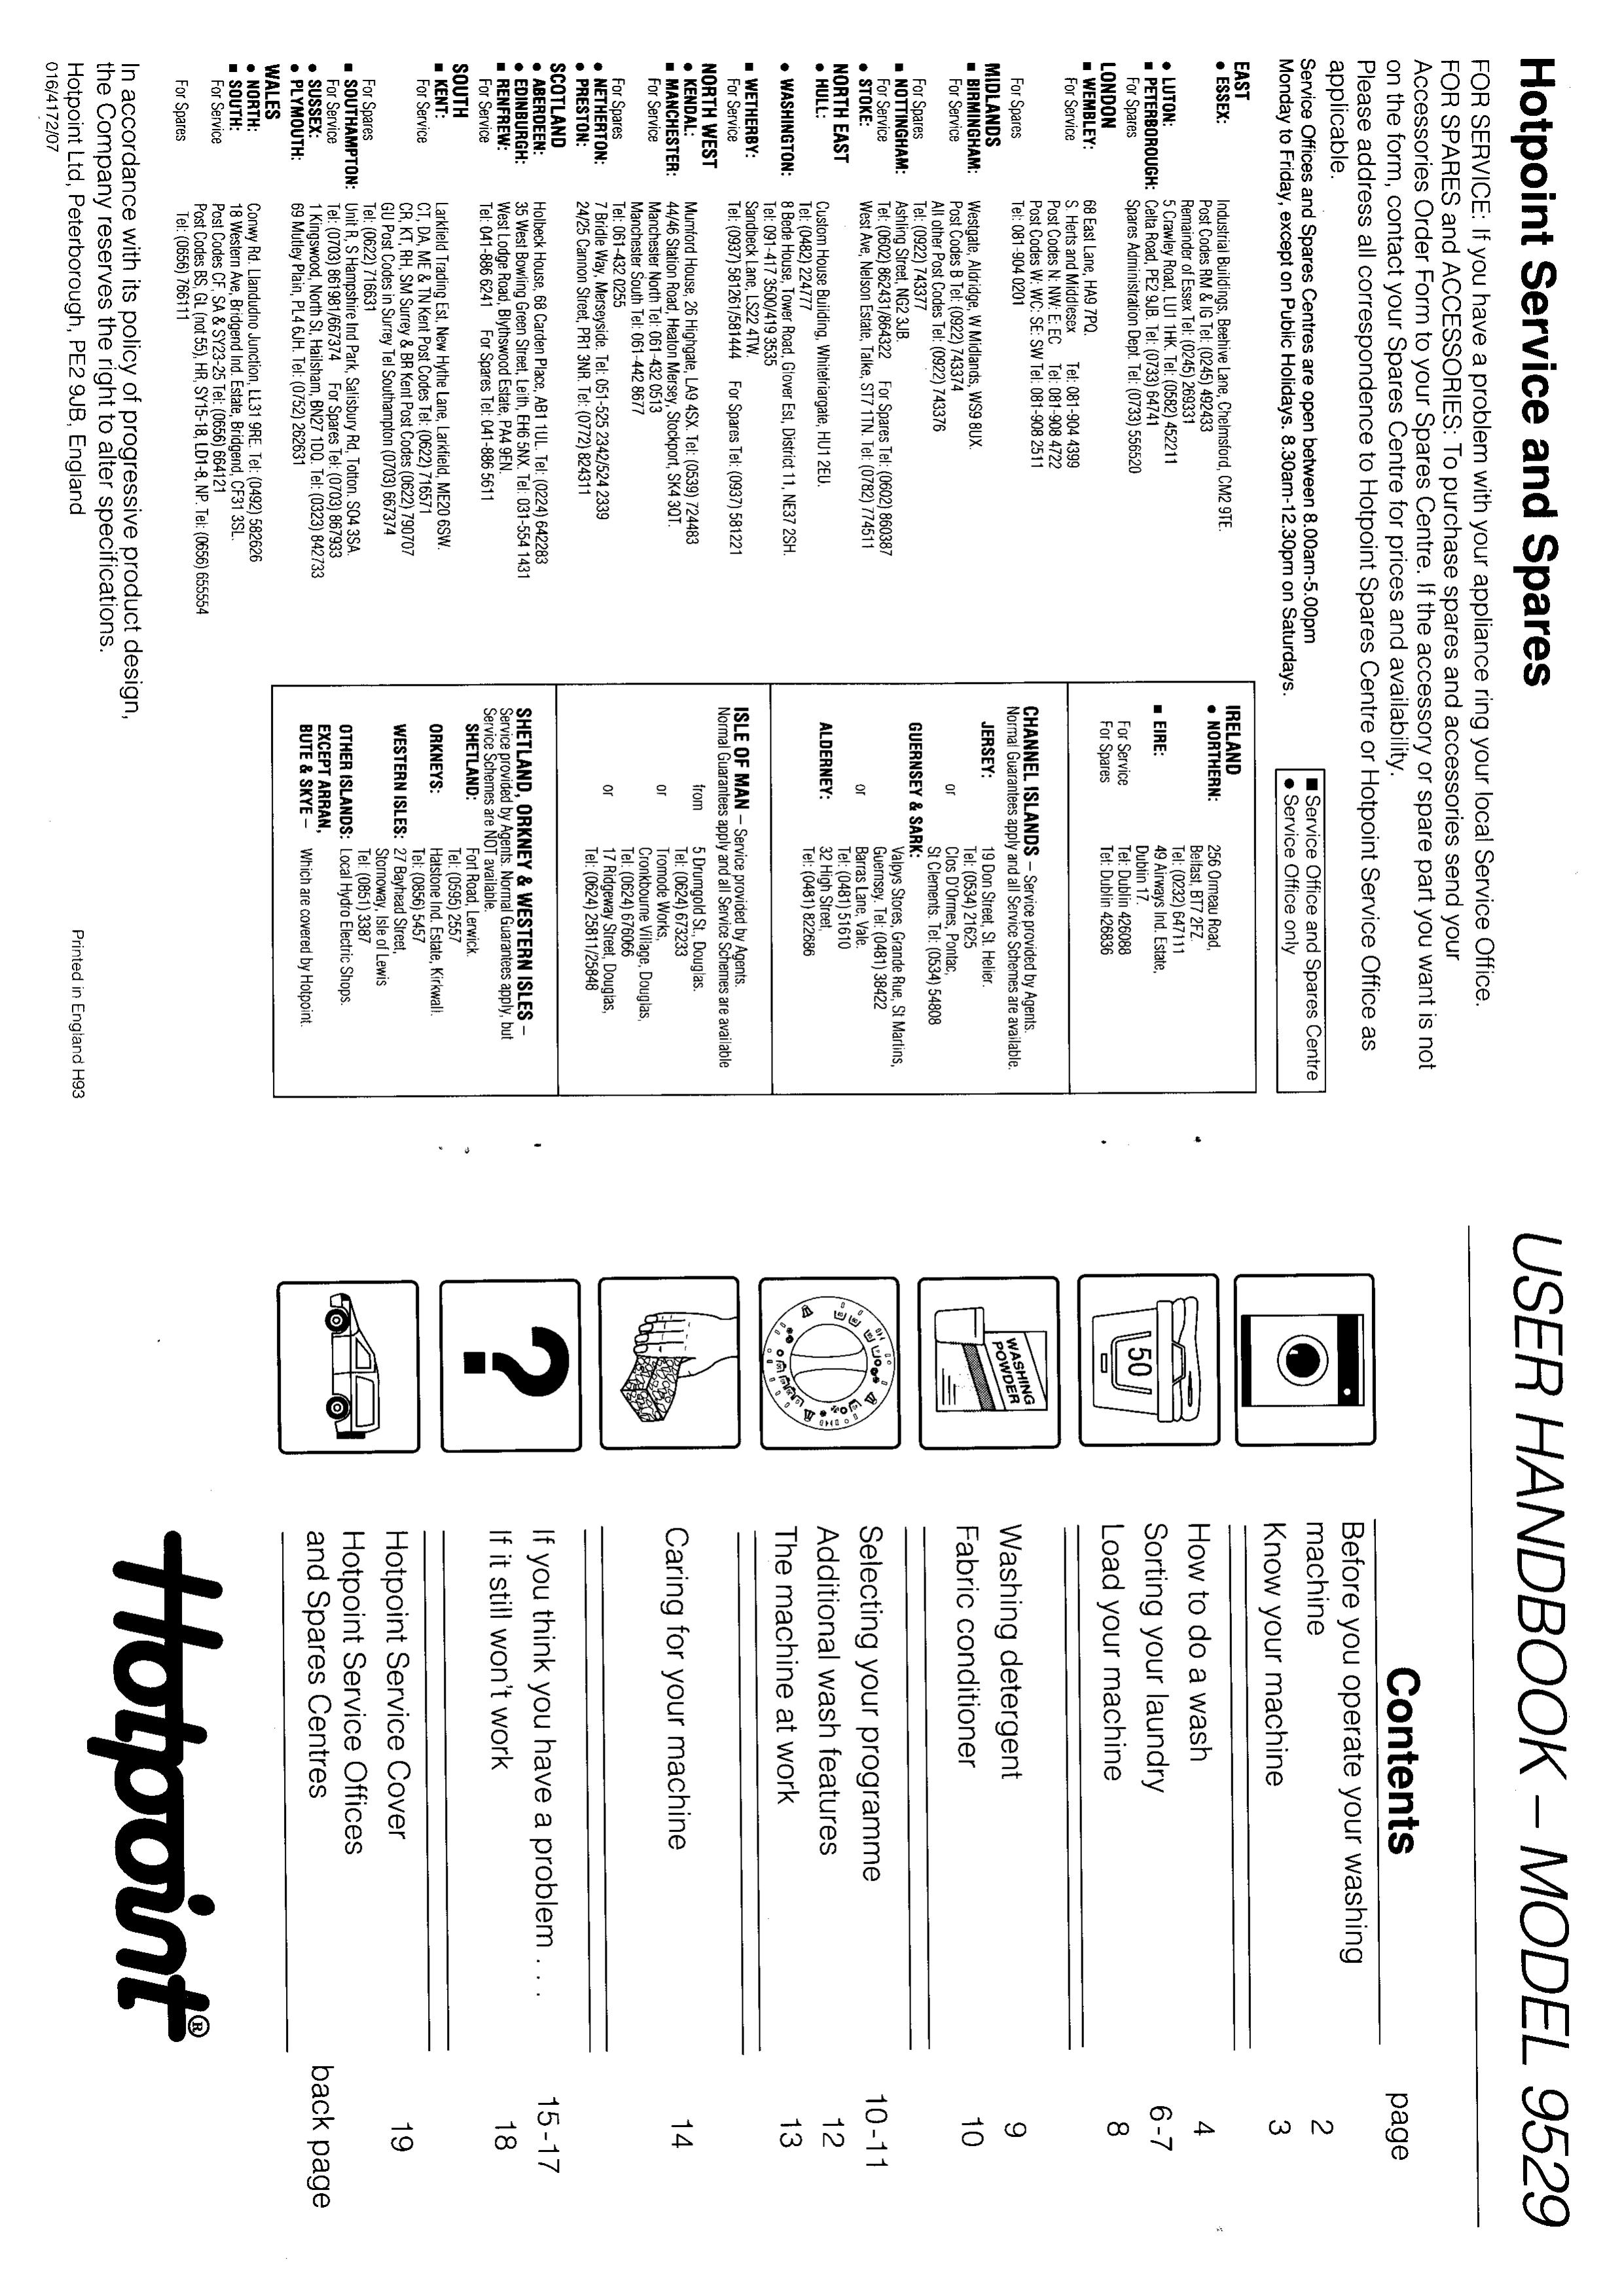 Hotpoint 9529 Washer User Manual